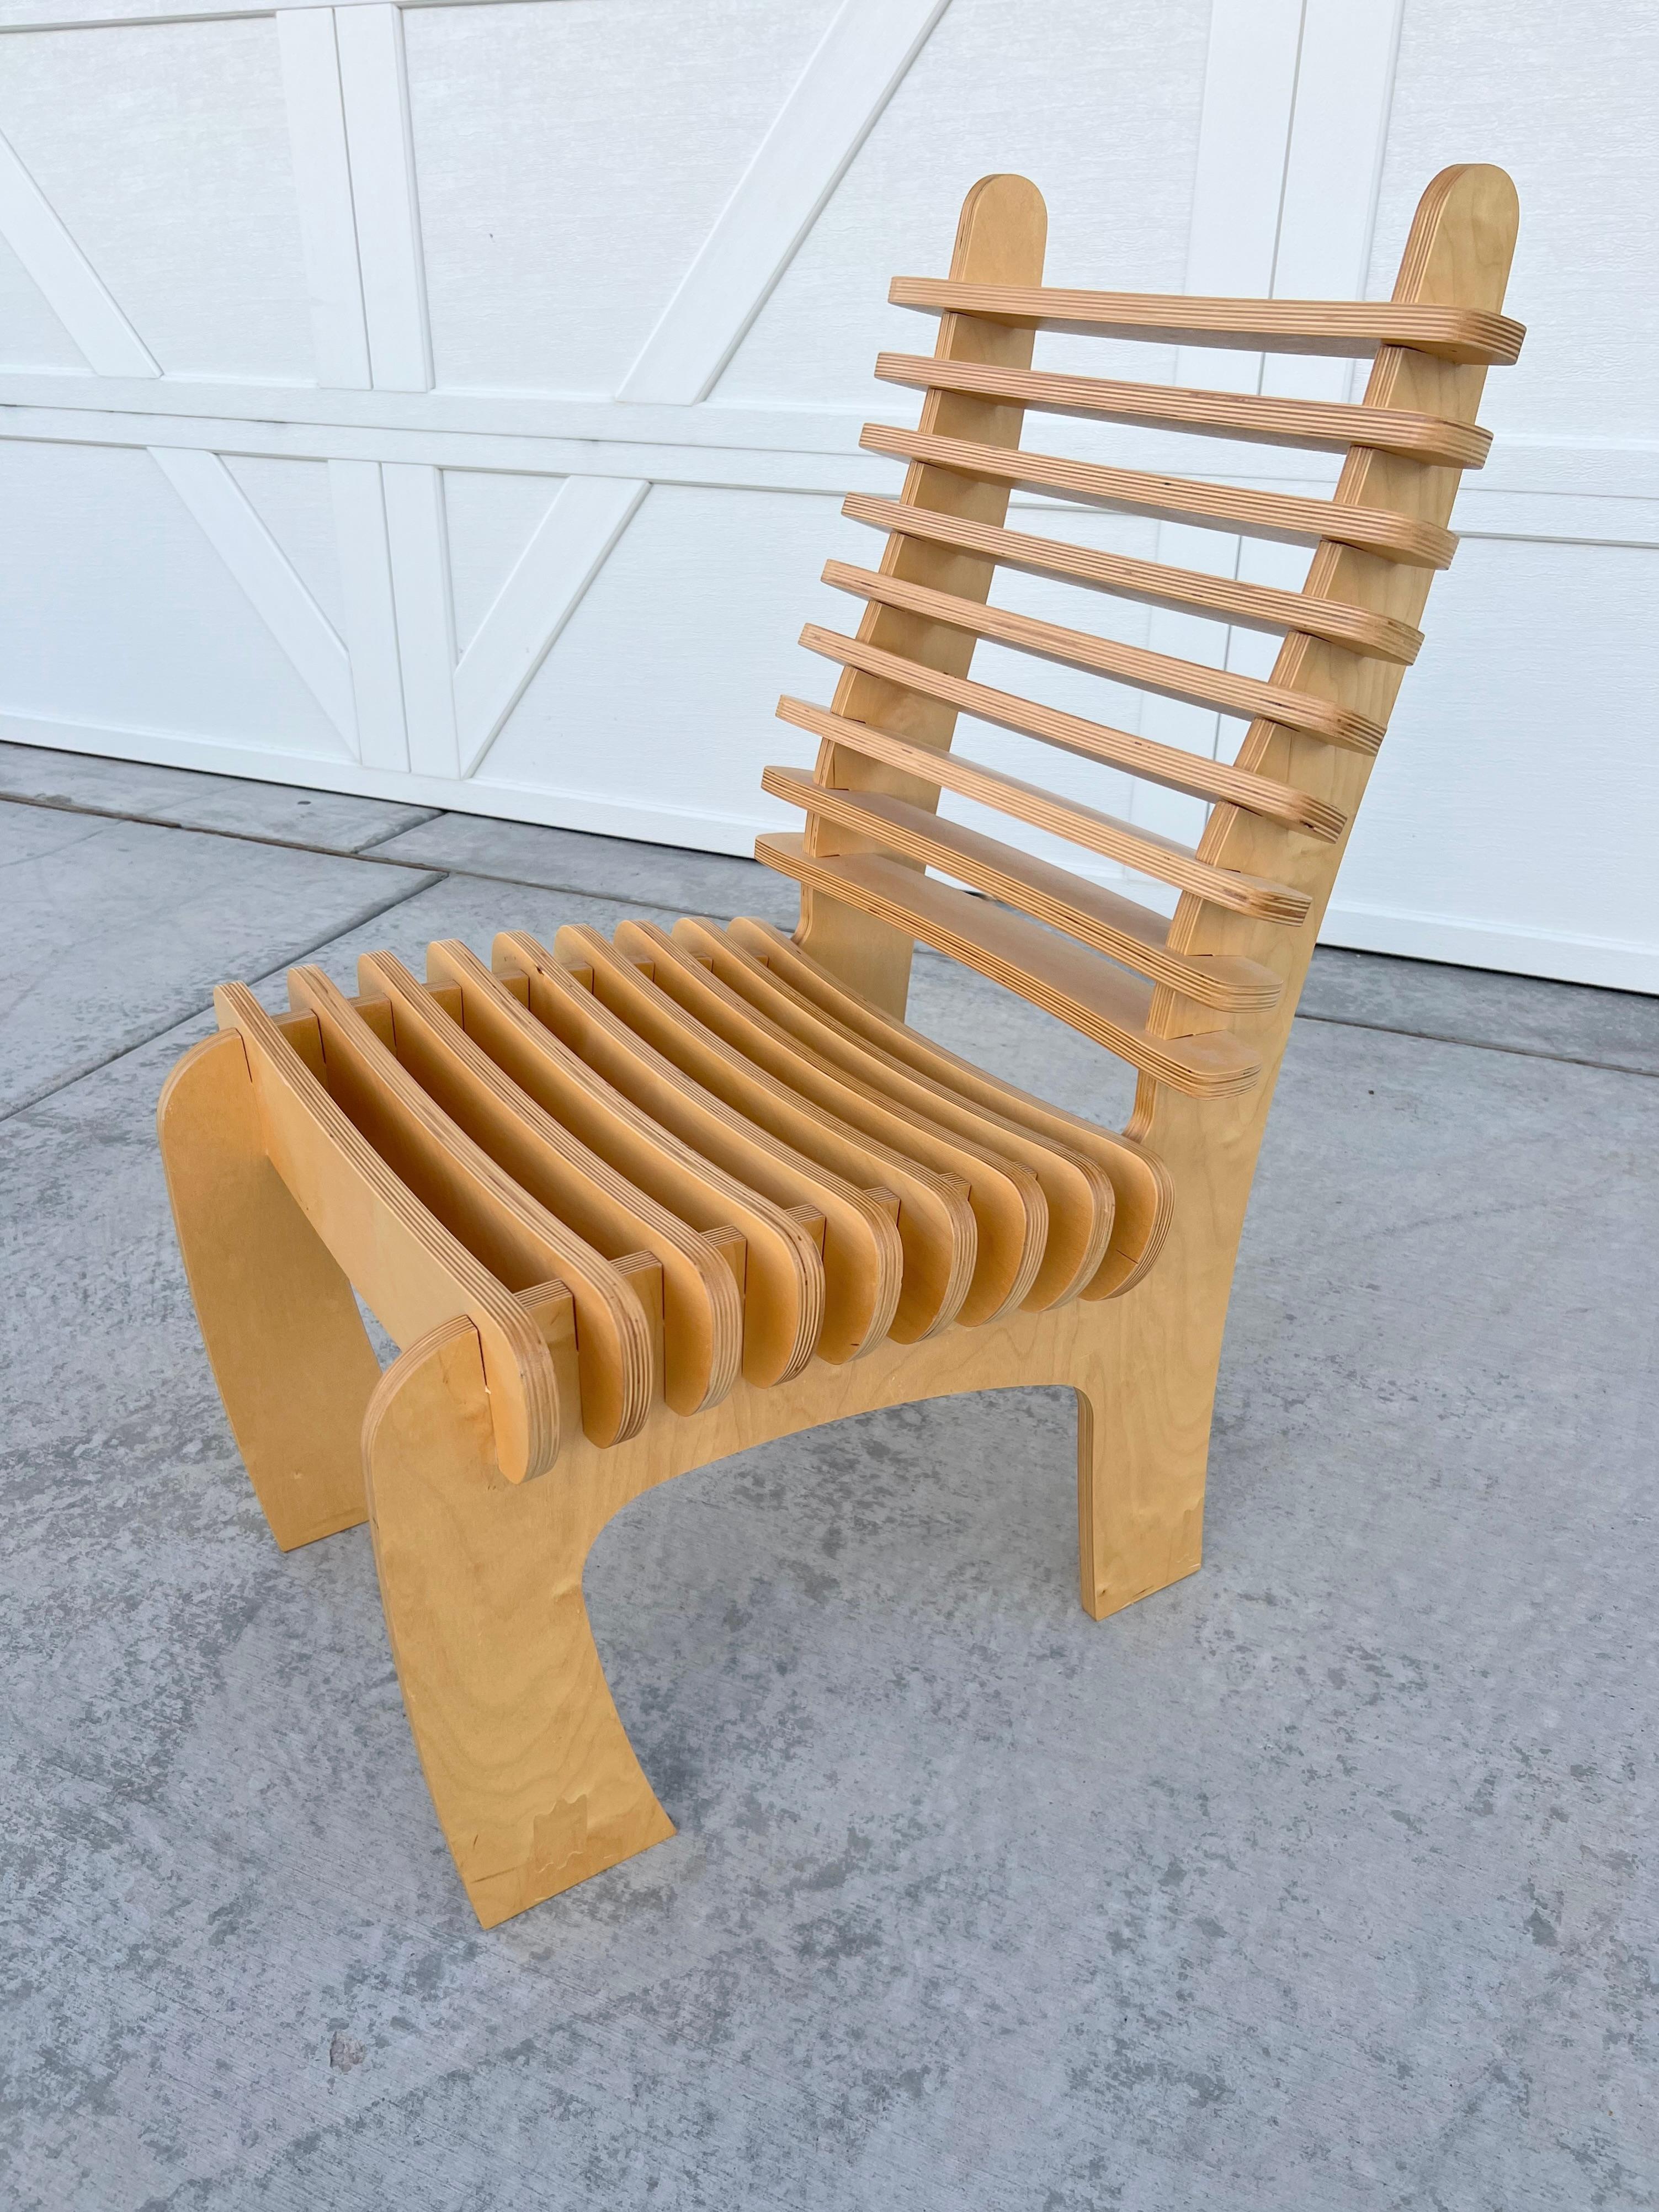 Modern Blond Plywood Minimalist Slat Side Chair Art Architectural Piece For Sale 4